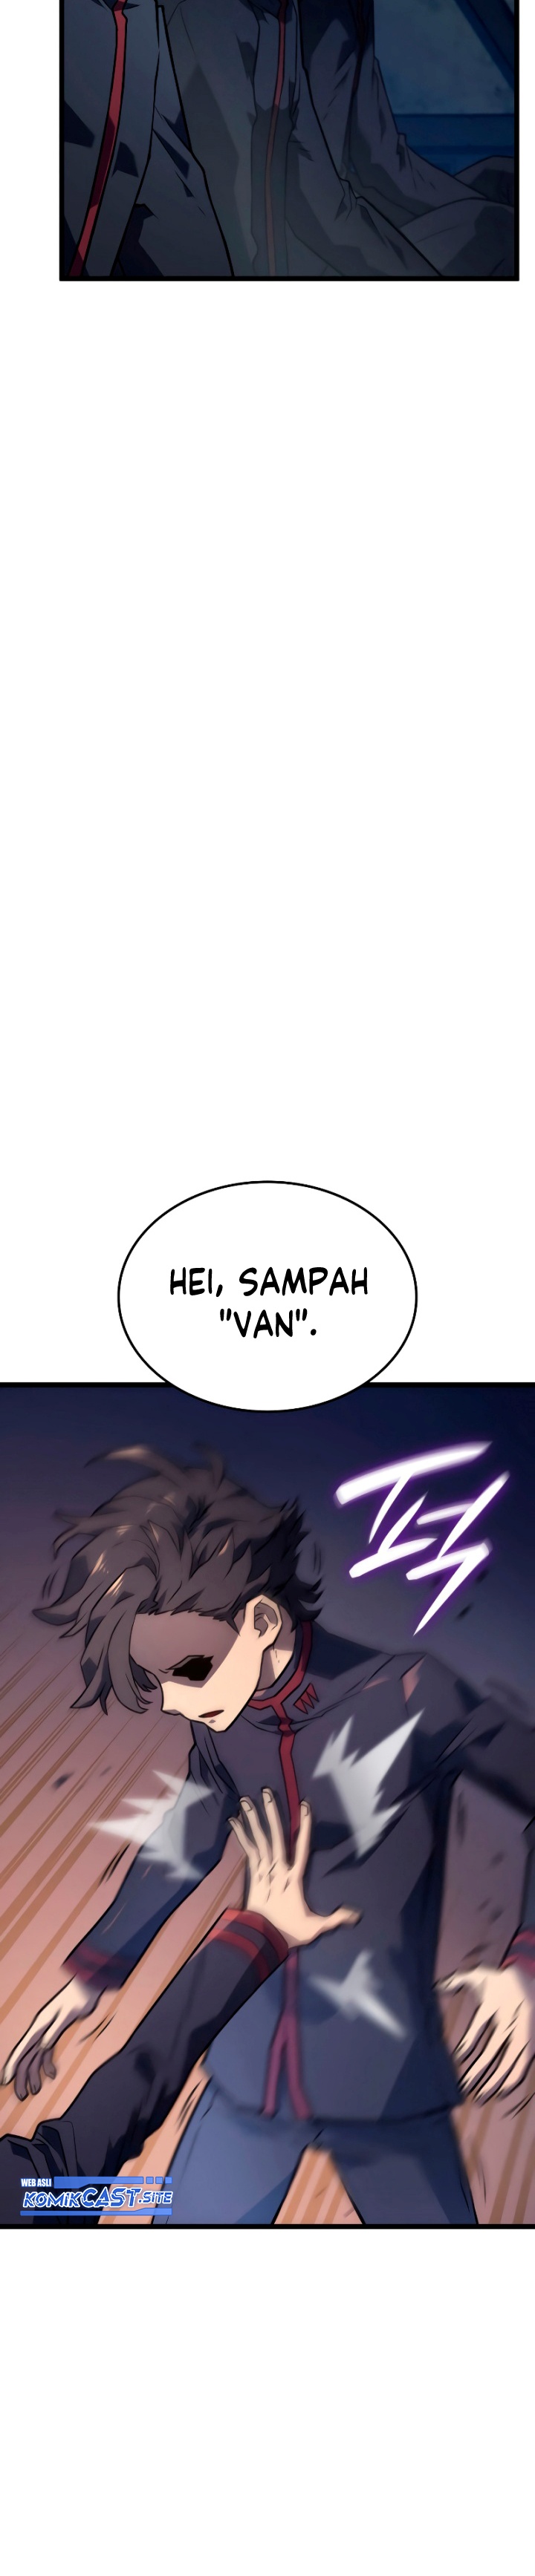 Revenge Of The Iron-blooded Sword Hound Chapter 2